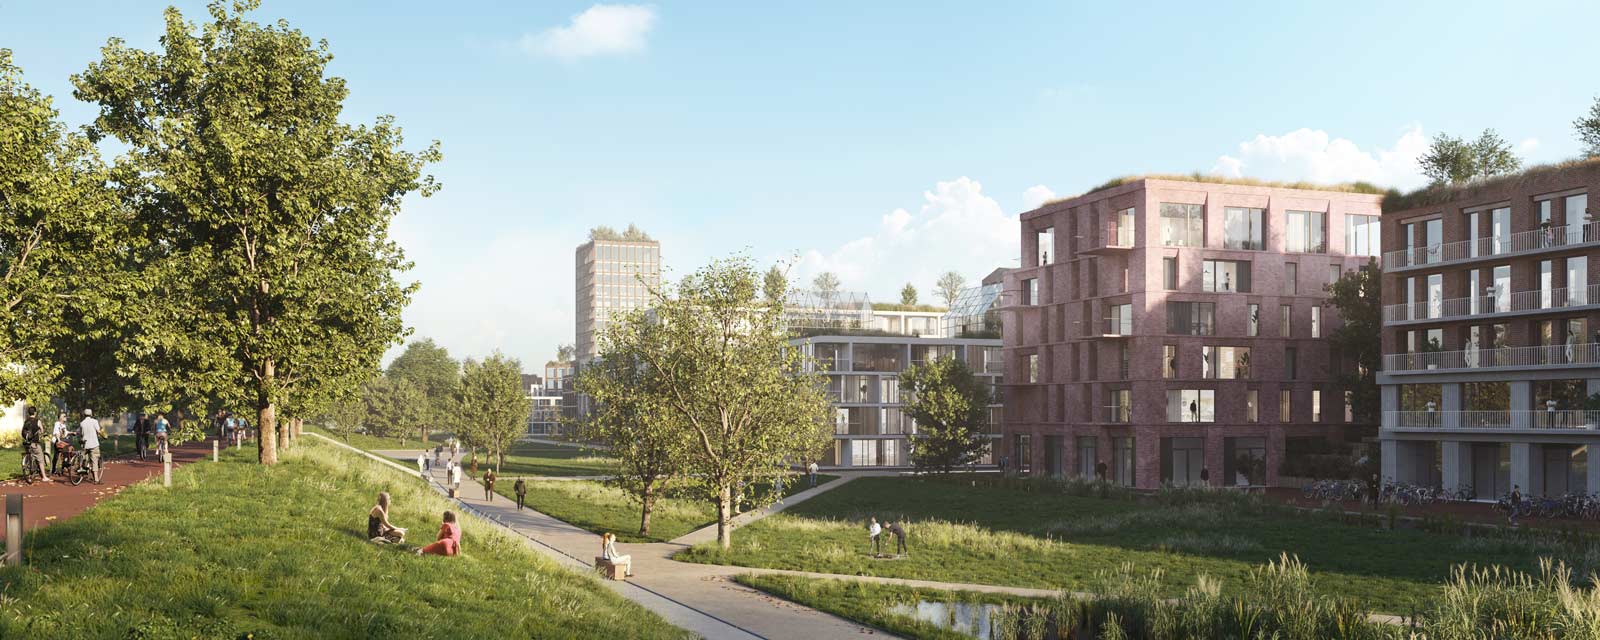 park image showing dike on the left and residential buildings on the right for project Klaprozenbuurt by BETA architect Amsterdam Evert Klinkenberg Auguste Gus van Oppen